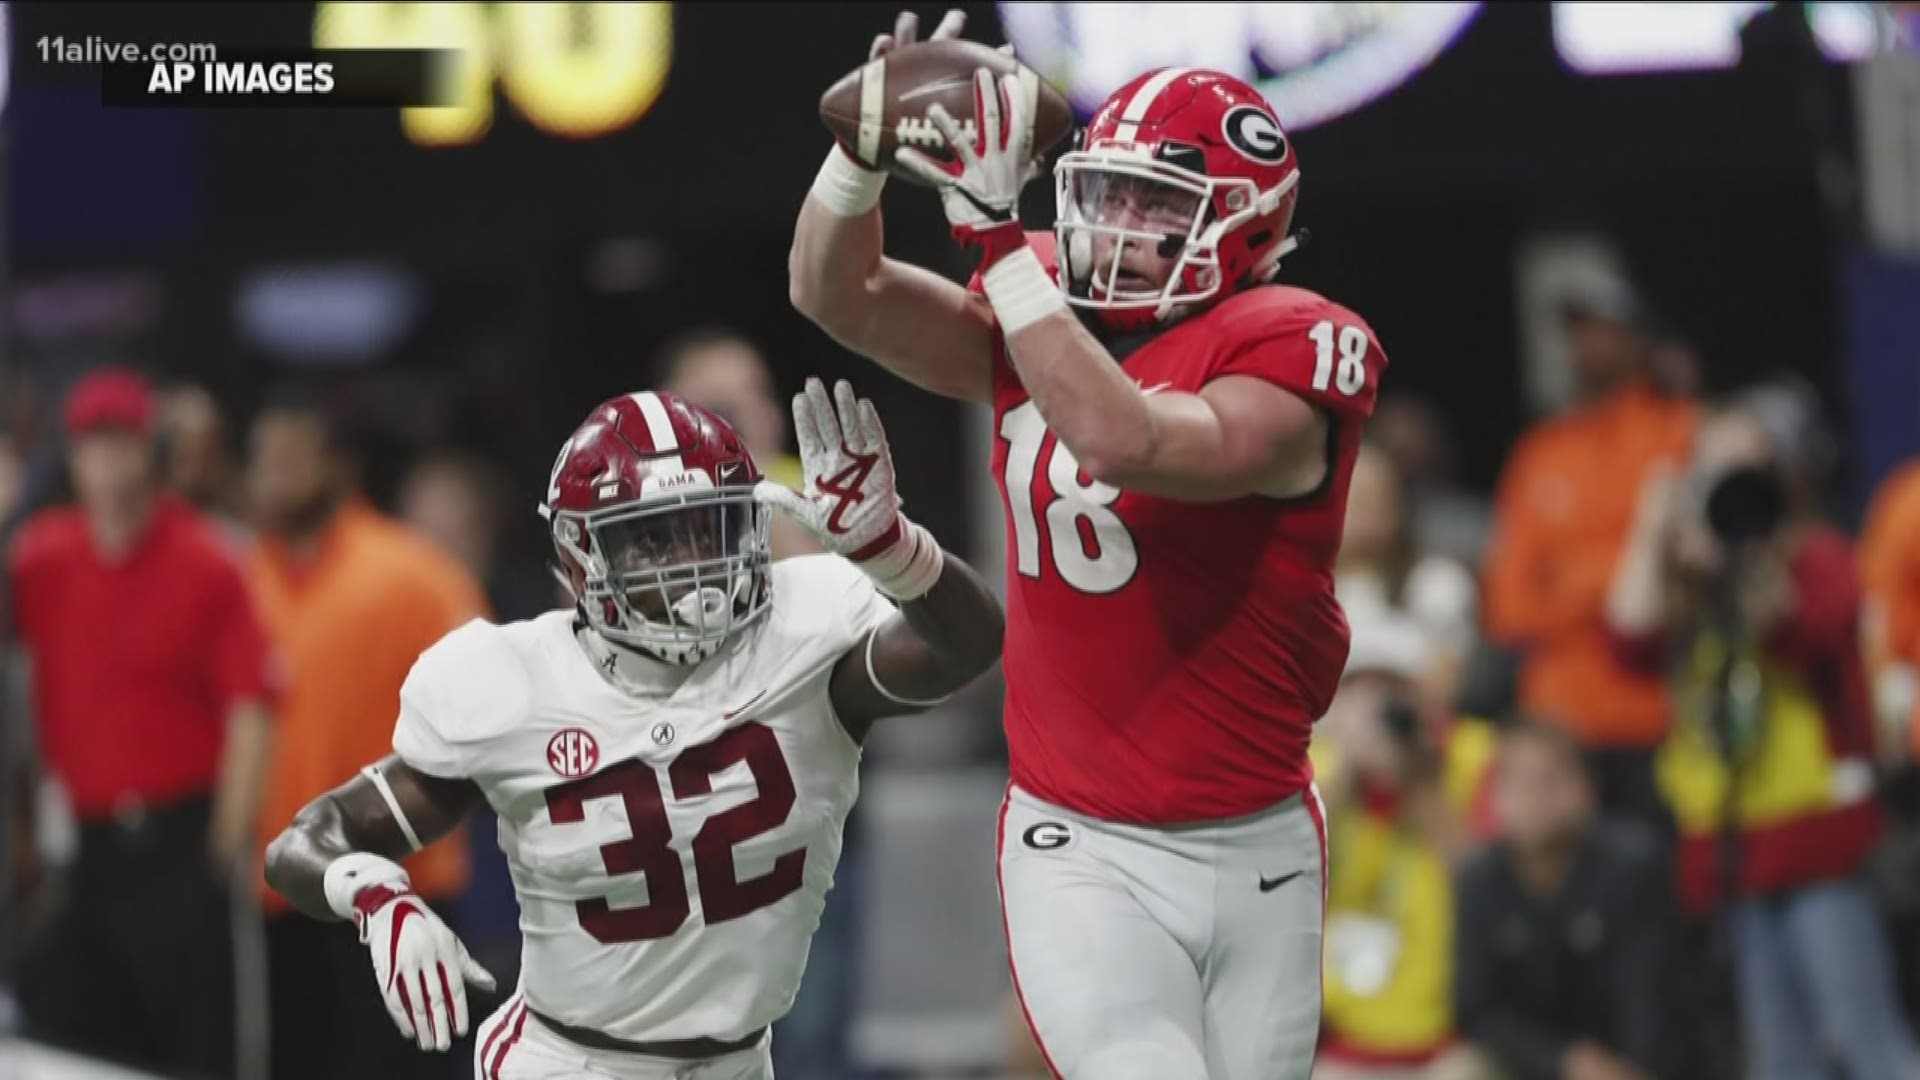 Isaac Nauta played tight end for the Bulldogs and was drafted last weekend by the Detroit Lions.